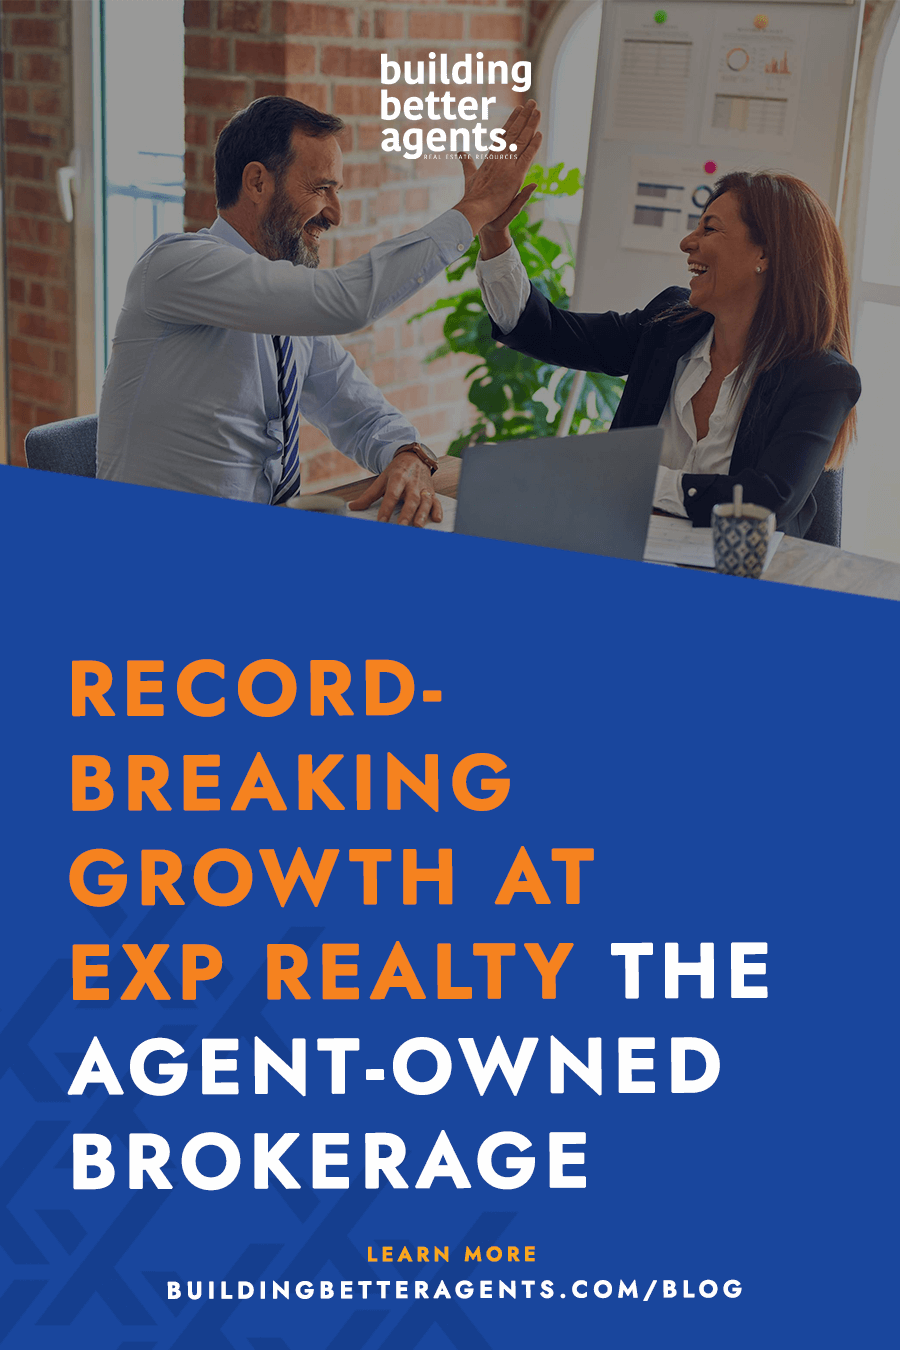 eXp Realty Exceeds 8,000 Real Estate Agents Across North America